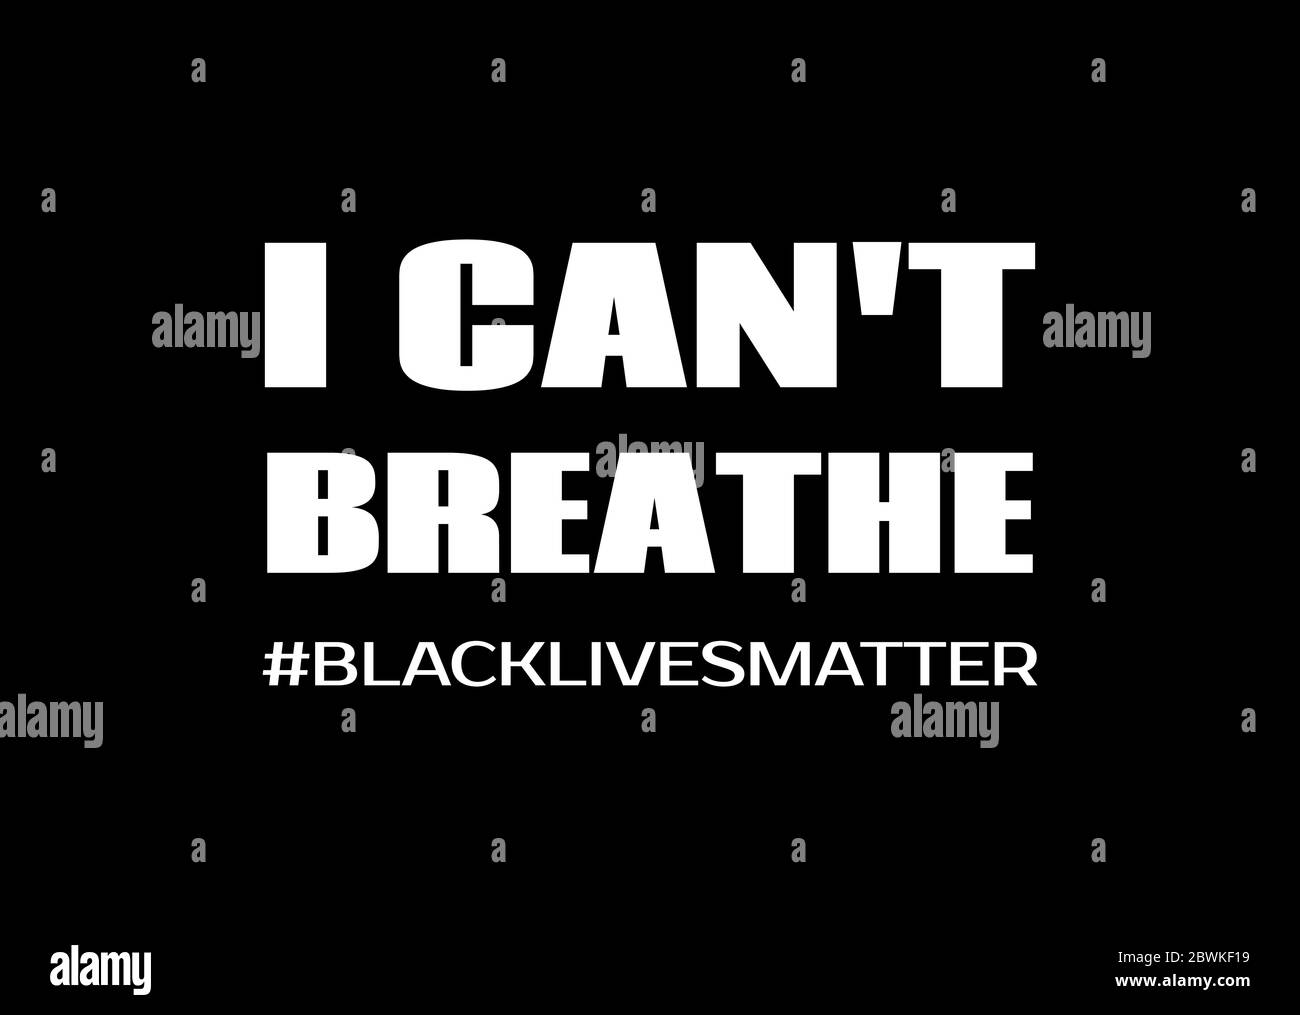 I can't breathe. Black lives matter. Vector poster against racism Stock Vector